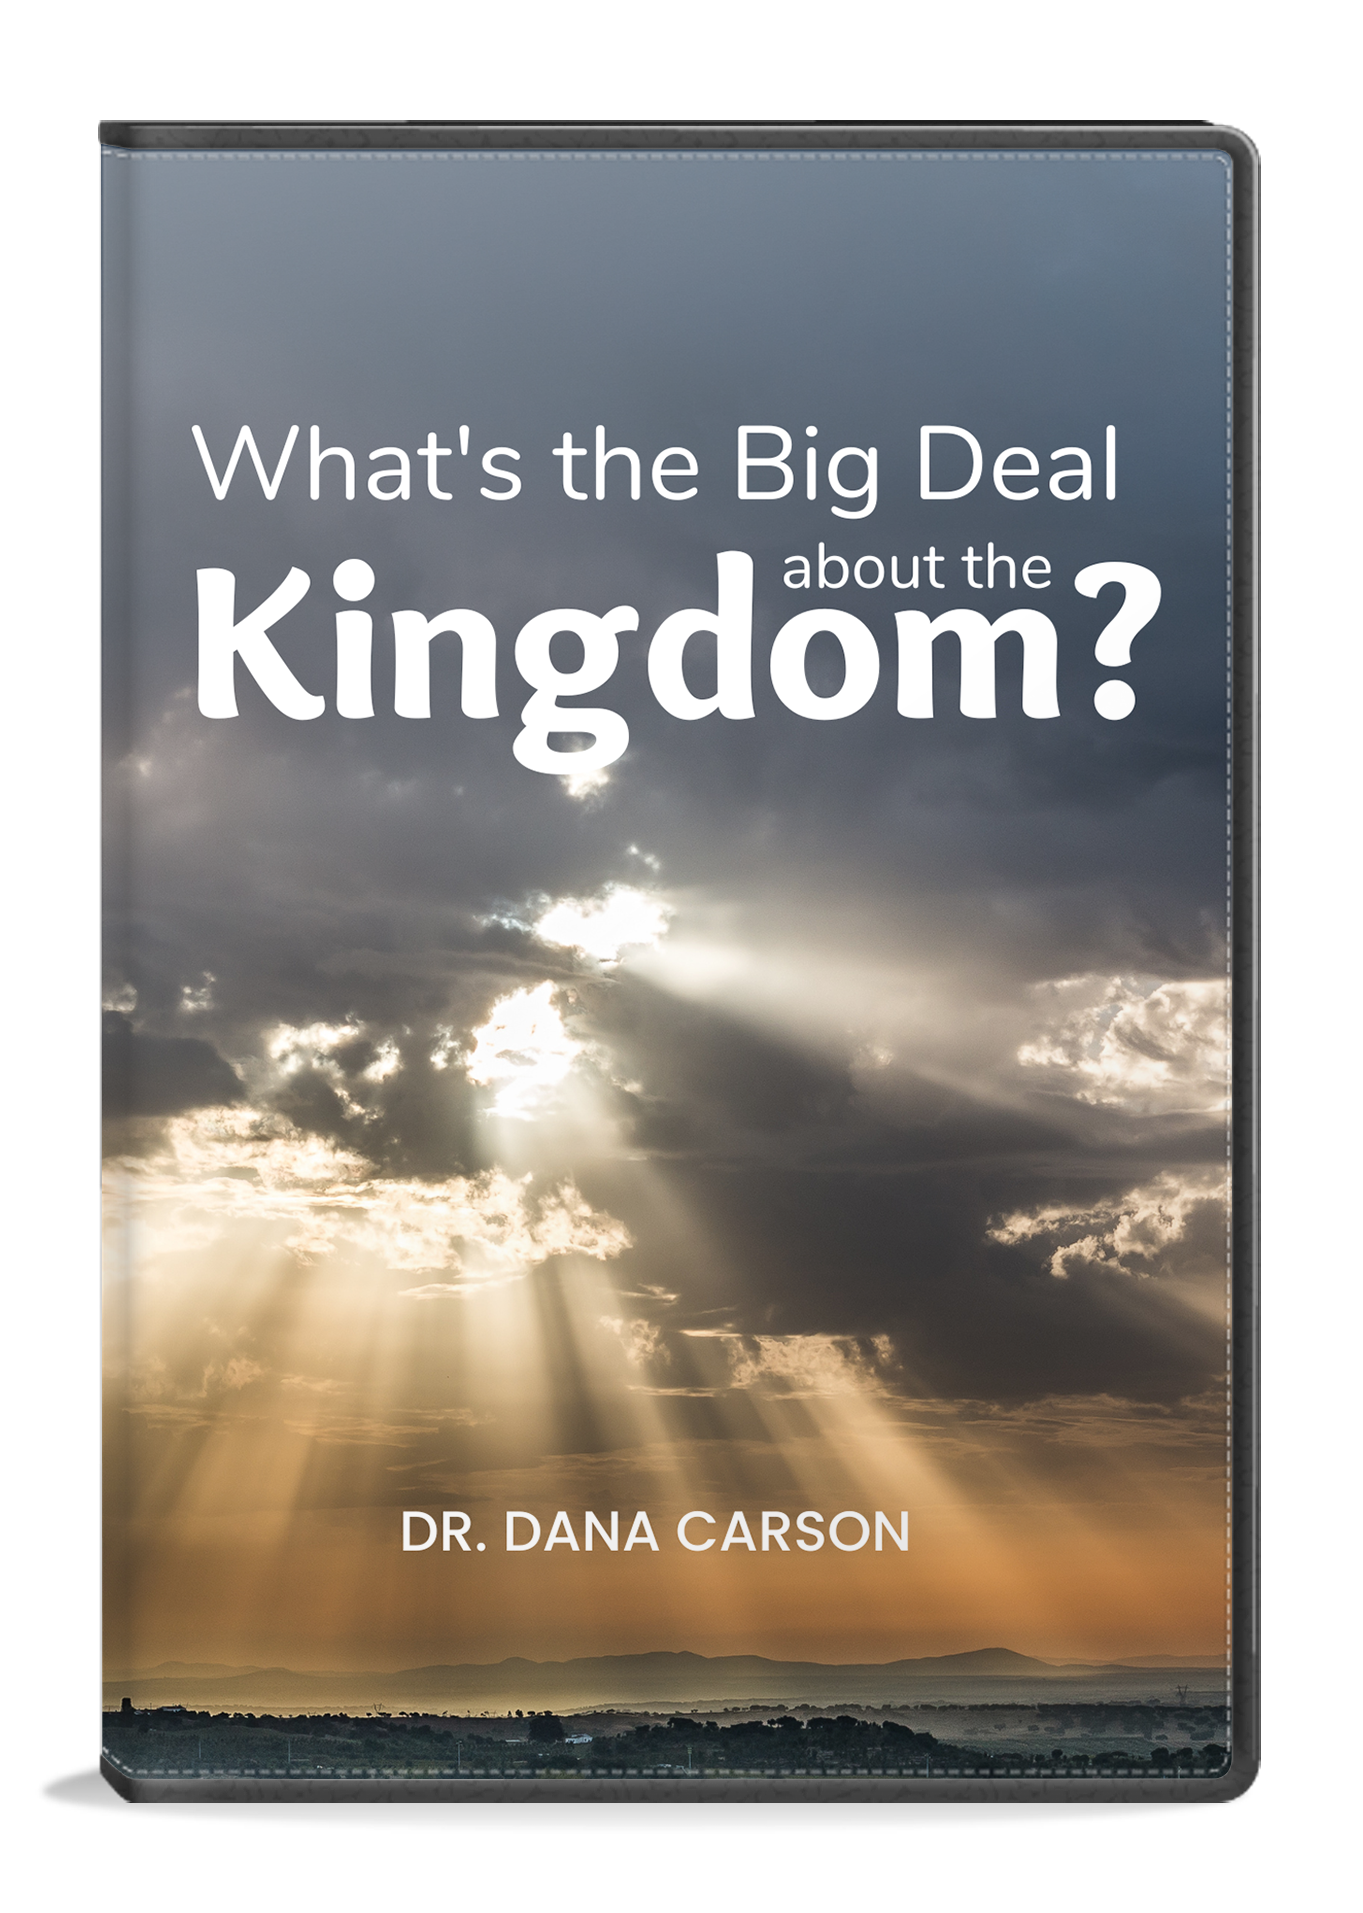 What's the Big Deal About the Kingdom? Kingdom Bible Study Guide